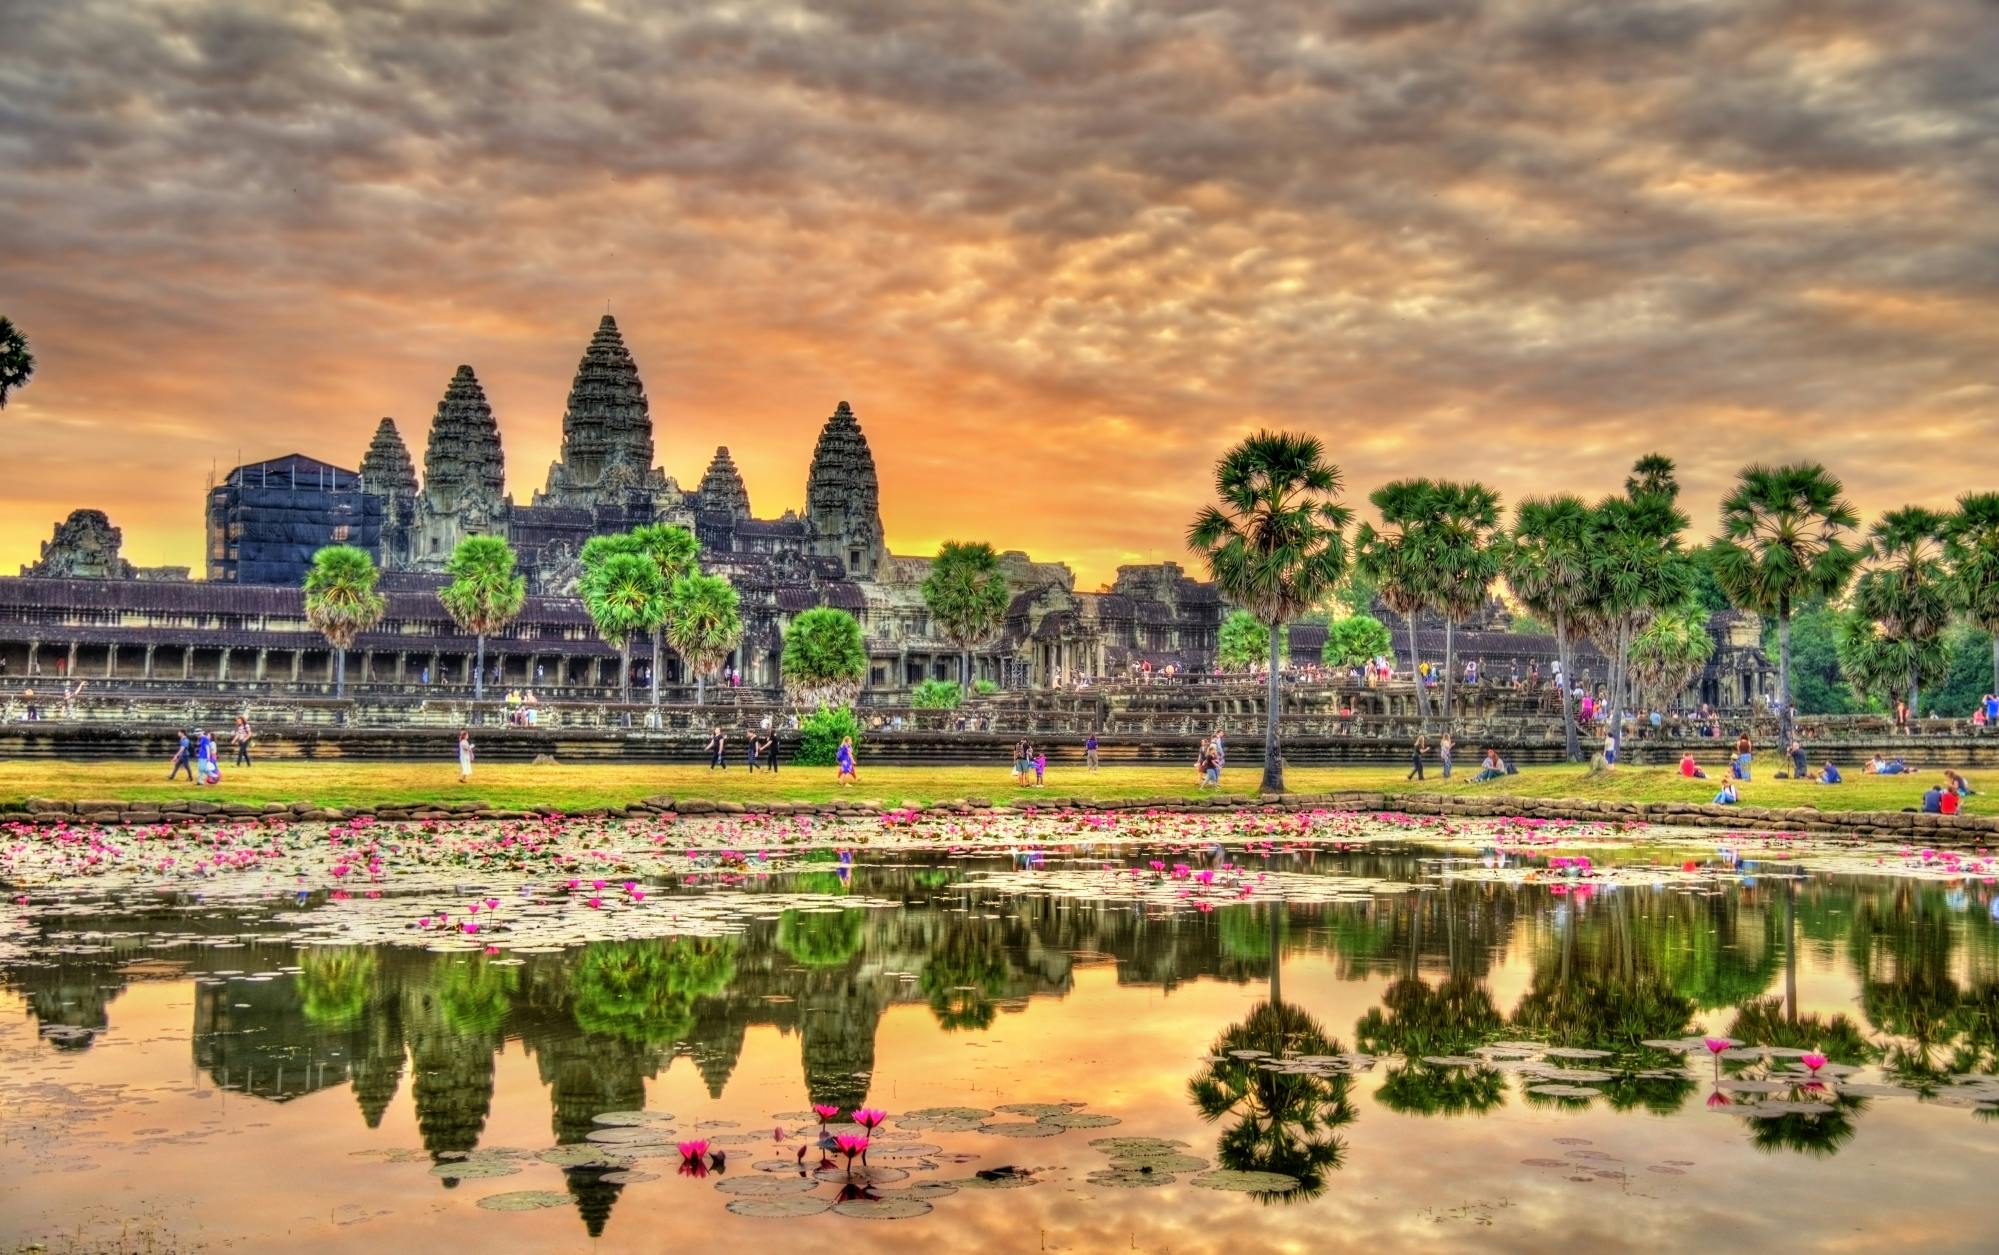 Private one-day tour of Angkor Wat, Angkor Thom and Tomb Raider